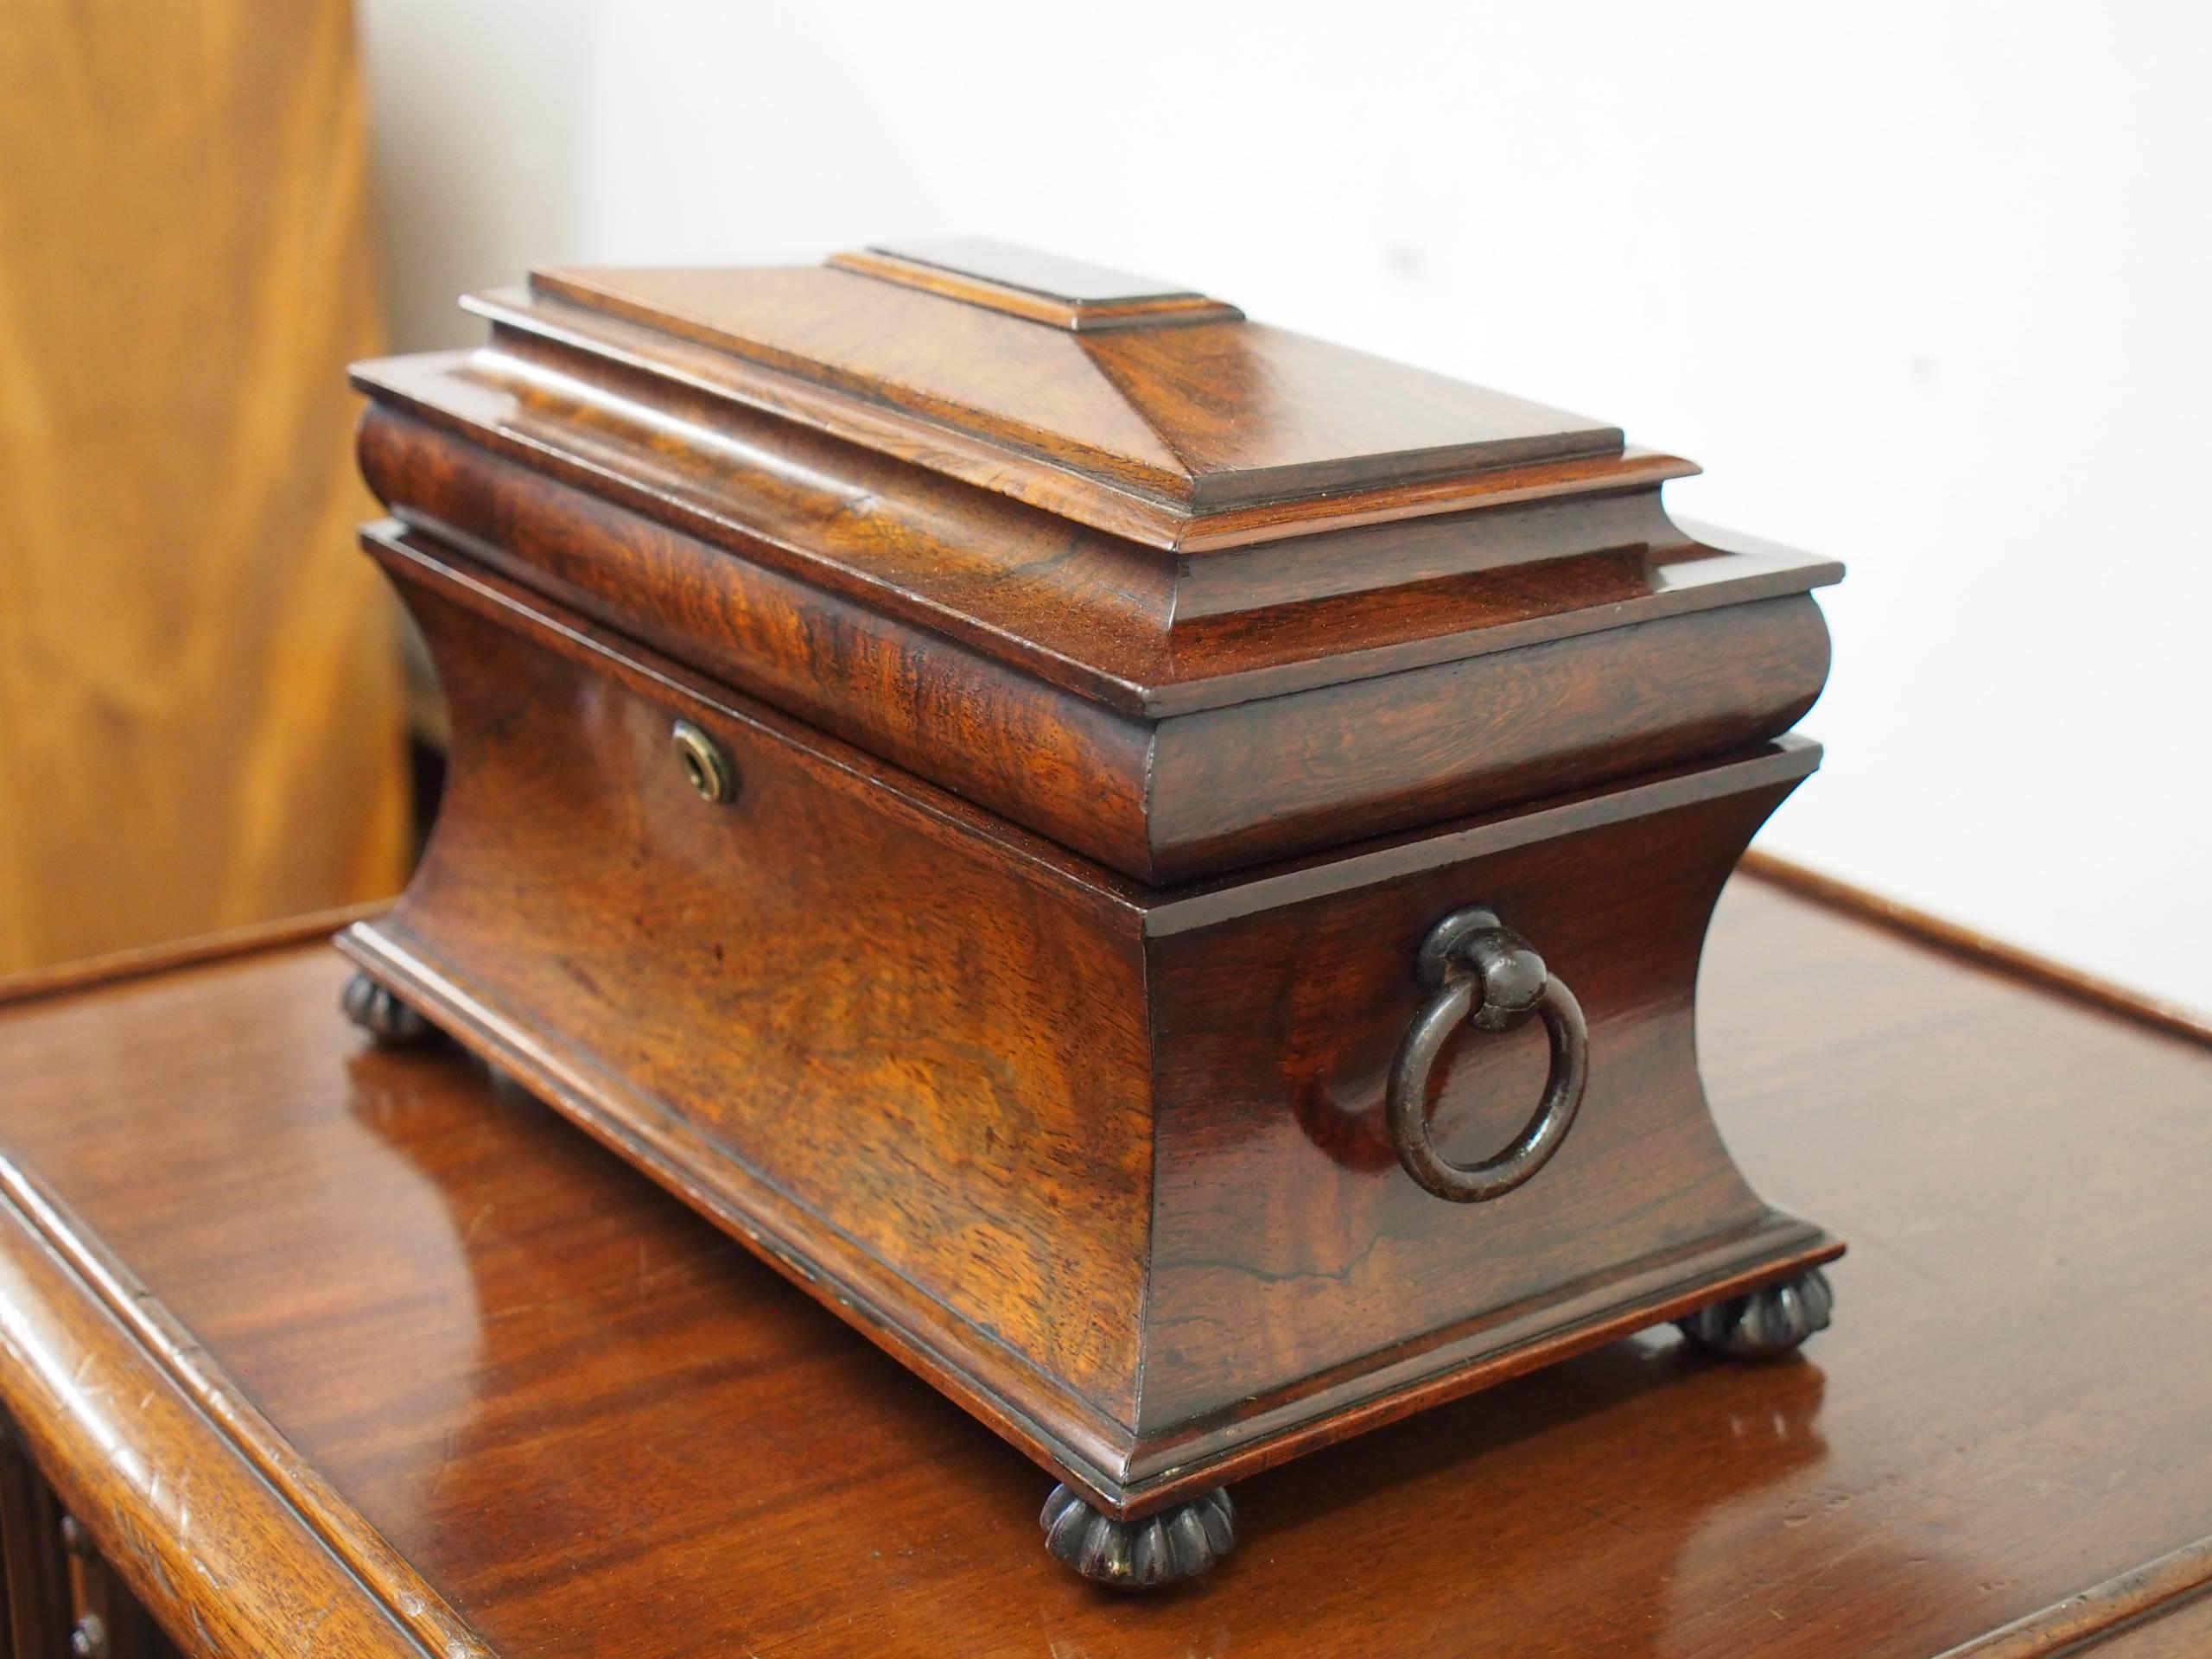 Late George IV rosewood sarcophagus shape tea caddy, circa 1830. It has a shaped top with various mouldings, and opens to reveal a pair of hinged containers either side of a circular aperture (originally for a mixing bowl). The inside of the lid is